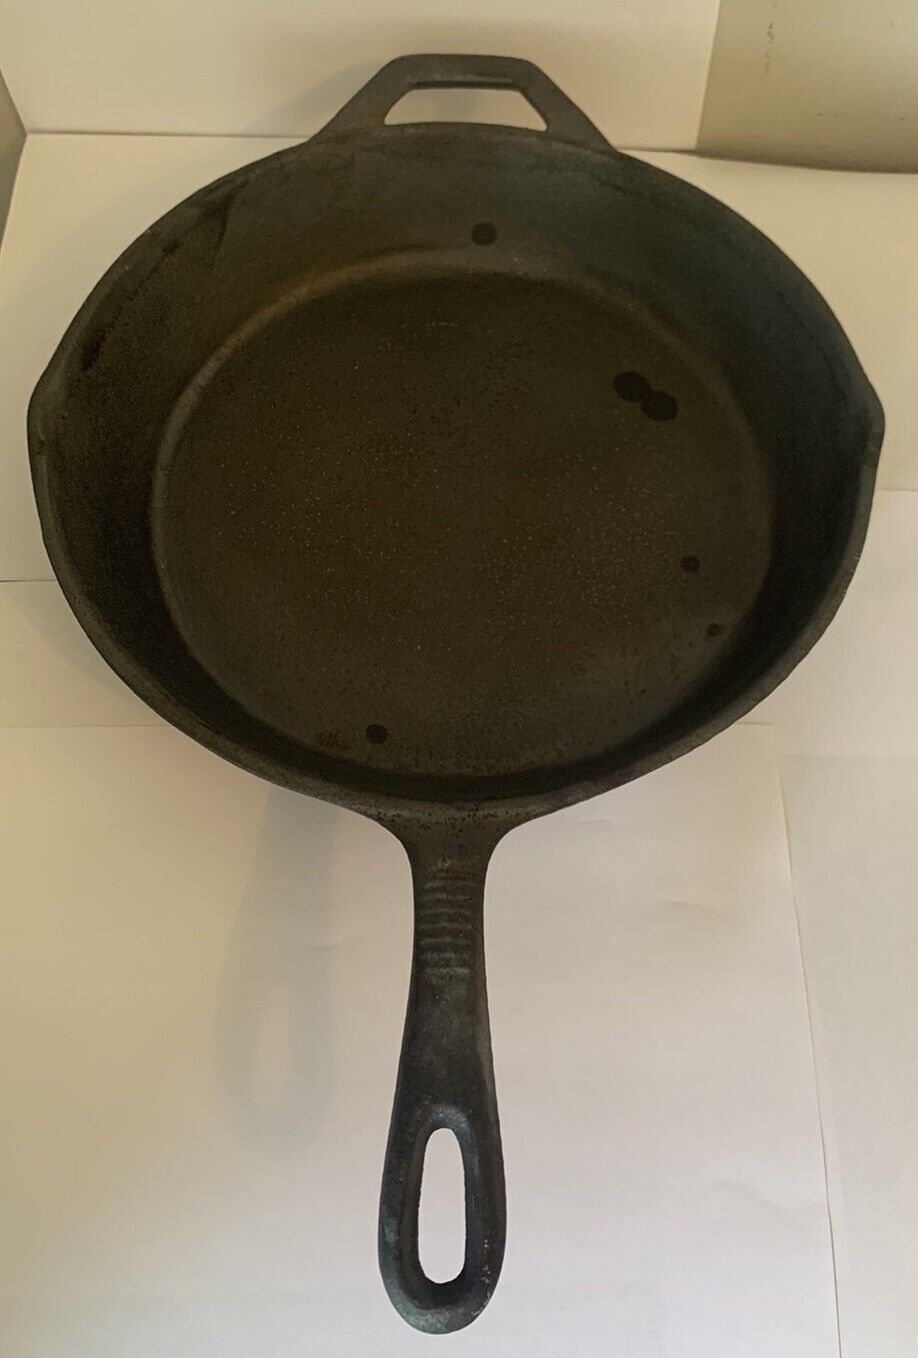 Cast Iron Skillet  #2  Vintage Made In USA